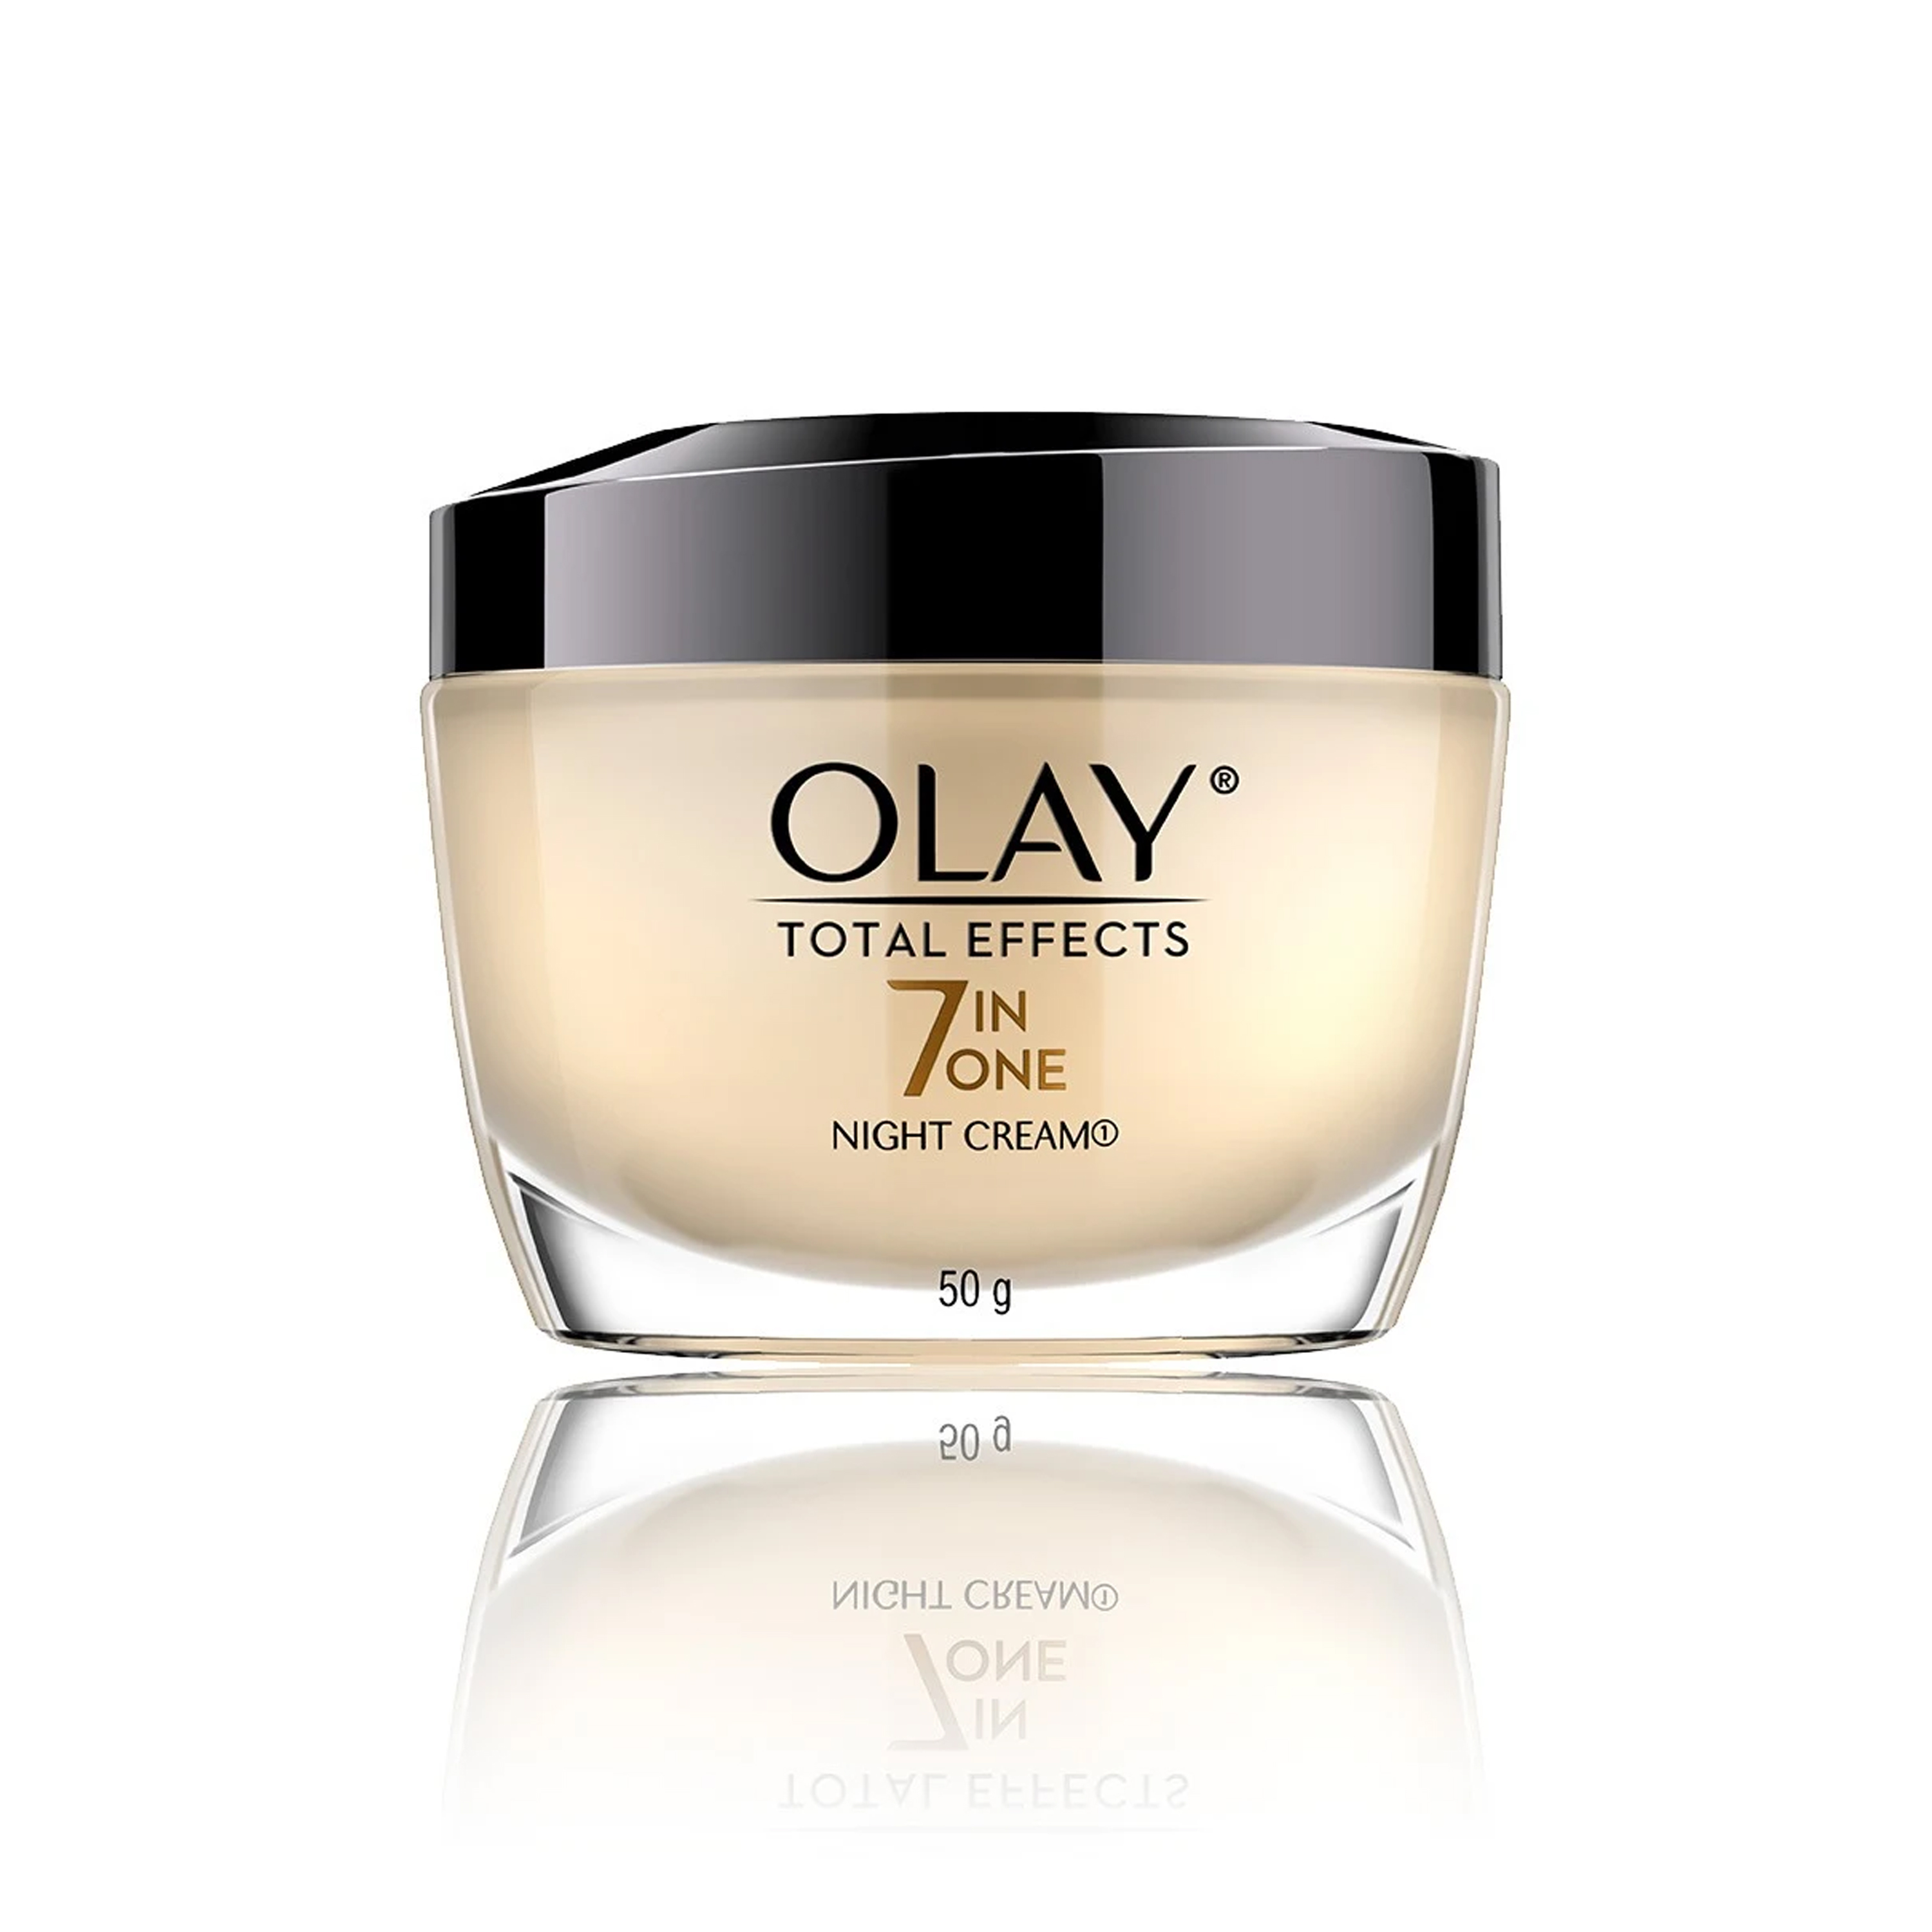 Olay Total Effects 7 in One Night Cream